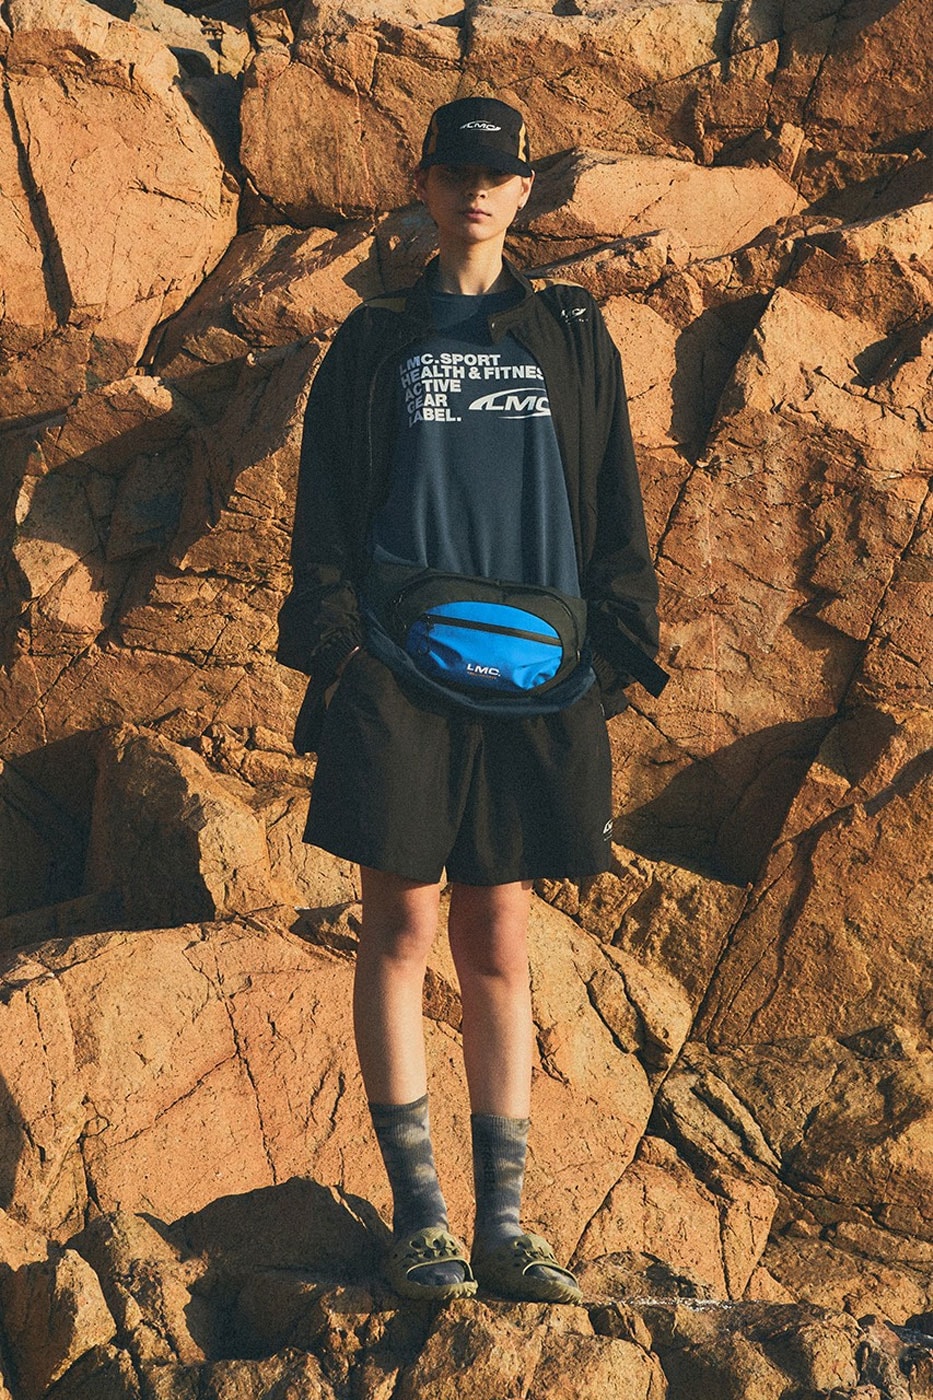 Lost Management Cities 2022 active gear collection lookbook coolon aerocool 3L w proof tees hiking shorts headwear caps bucket hats bags release info date